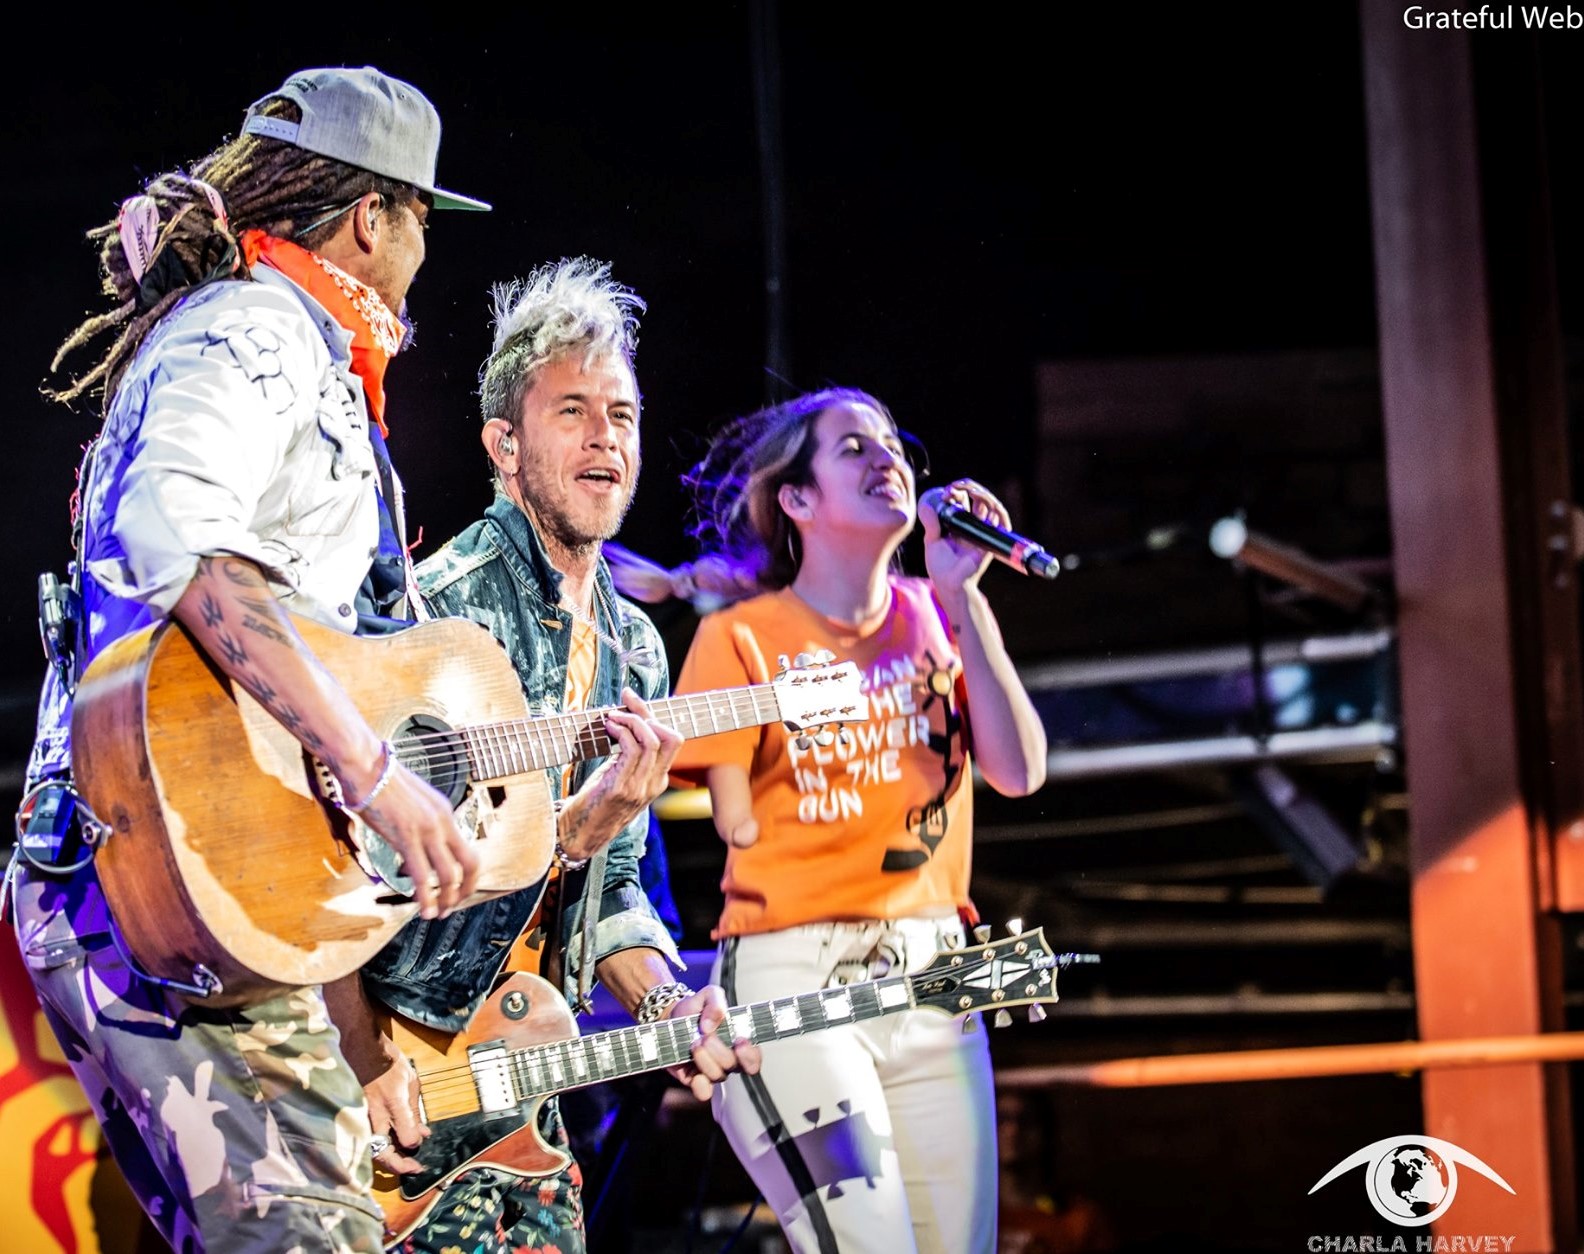 Victoria Canal with Michael Franti & Spearhead